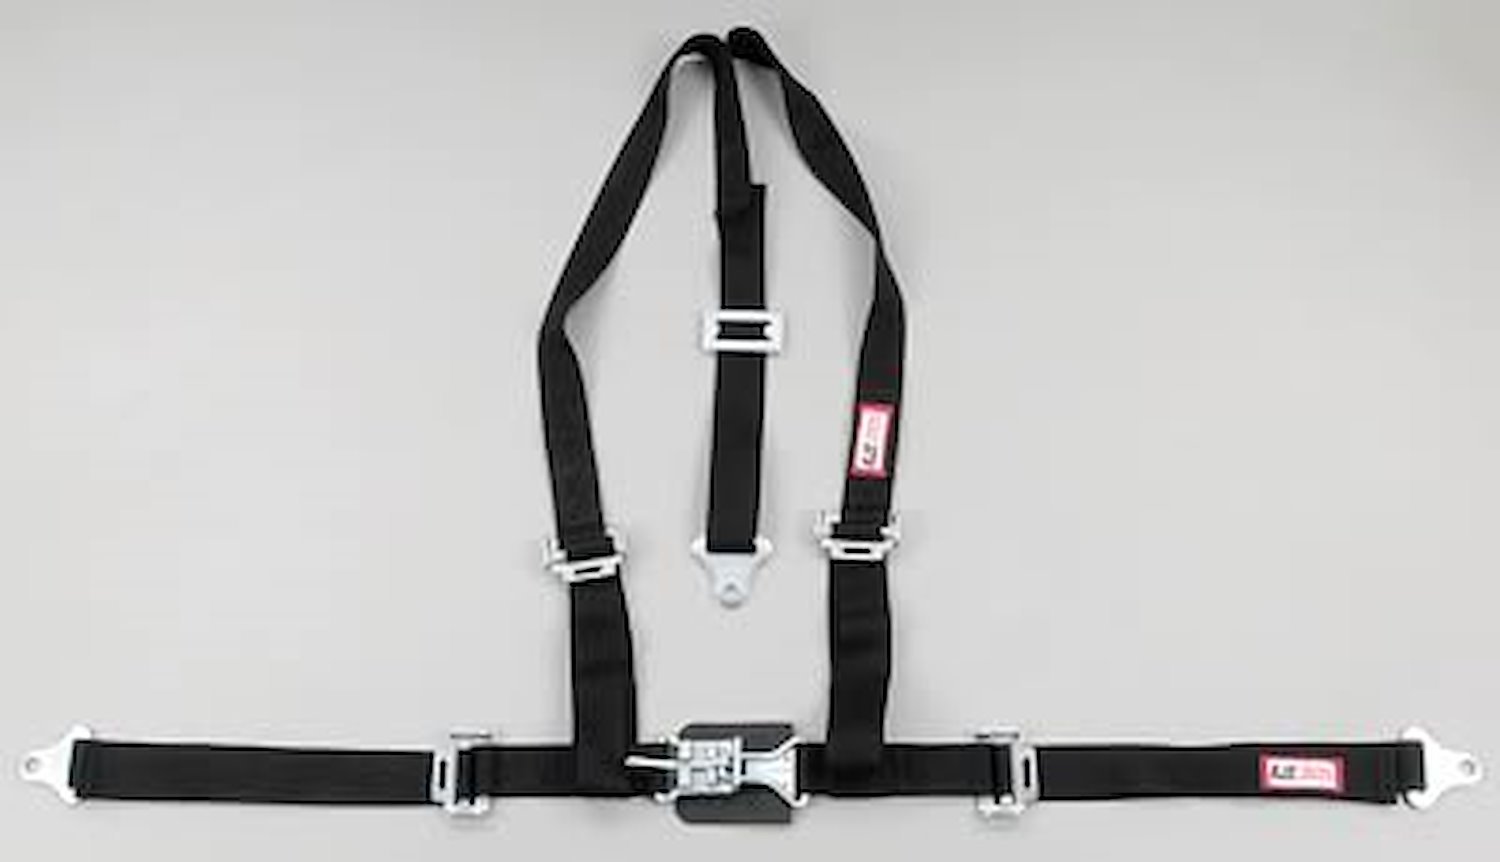 NON-SFI L&L HARNESS 3 PULL UP Lap Belt SEWN IN 2 S.H. Individual FLOOR Mount ALL WRAP ENDS PURPLE